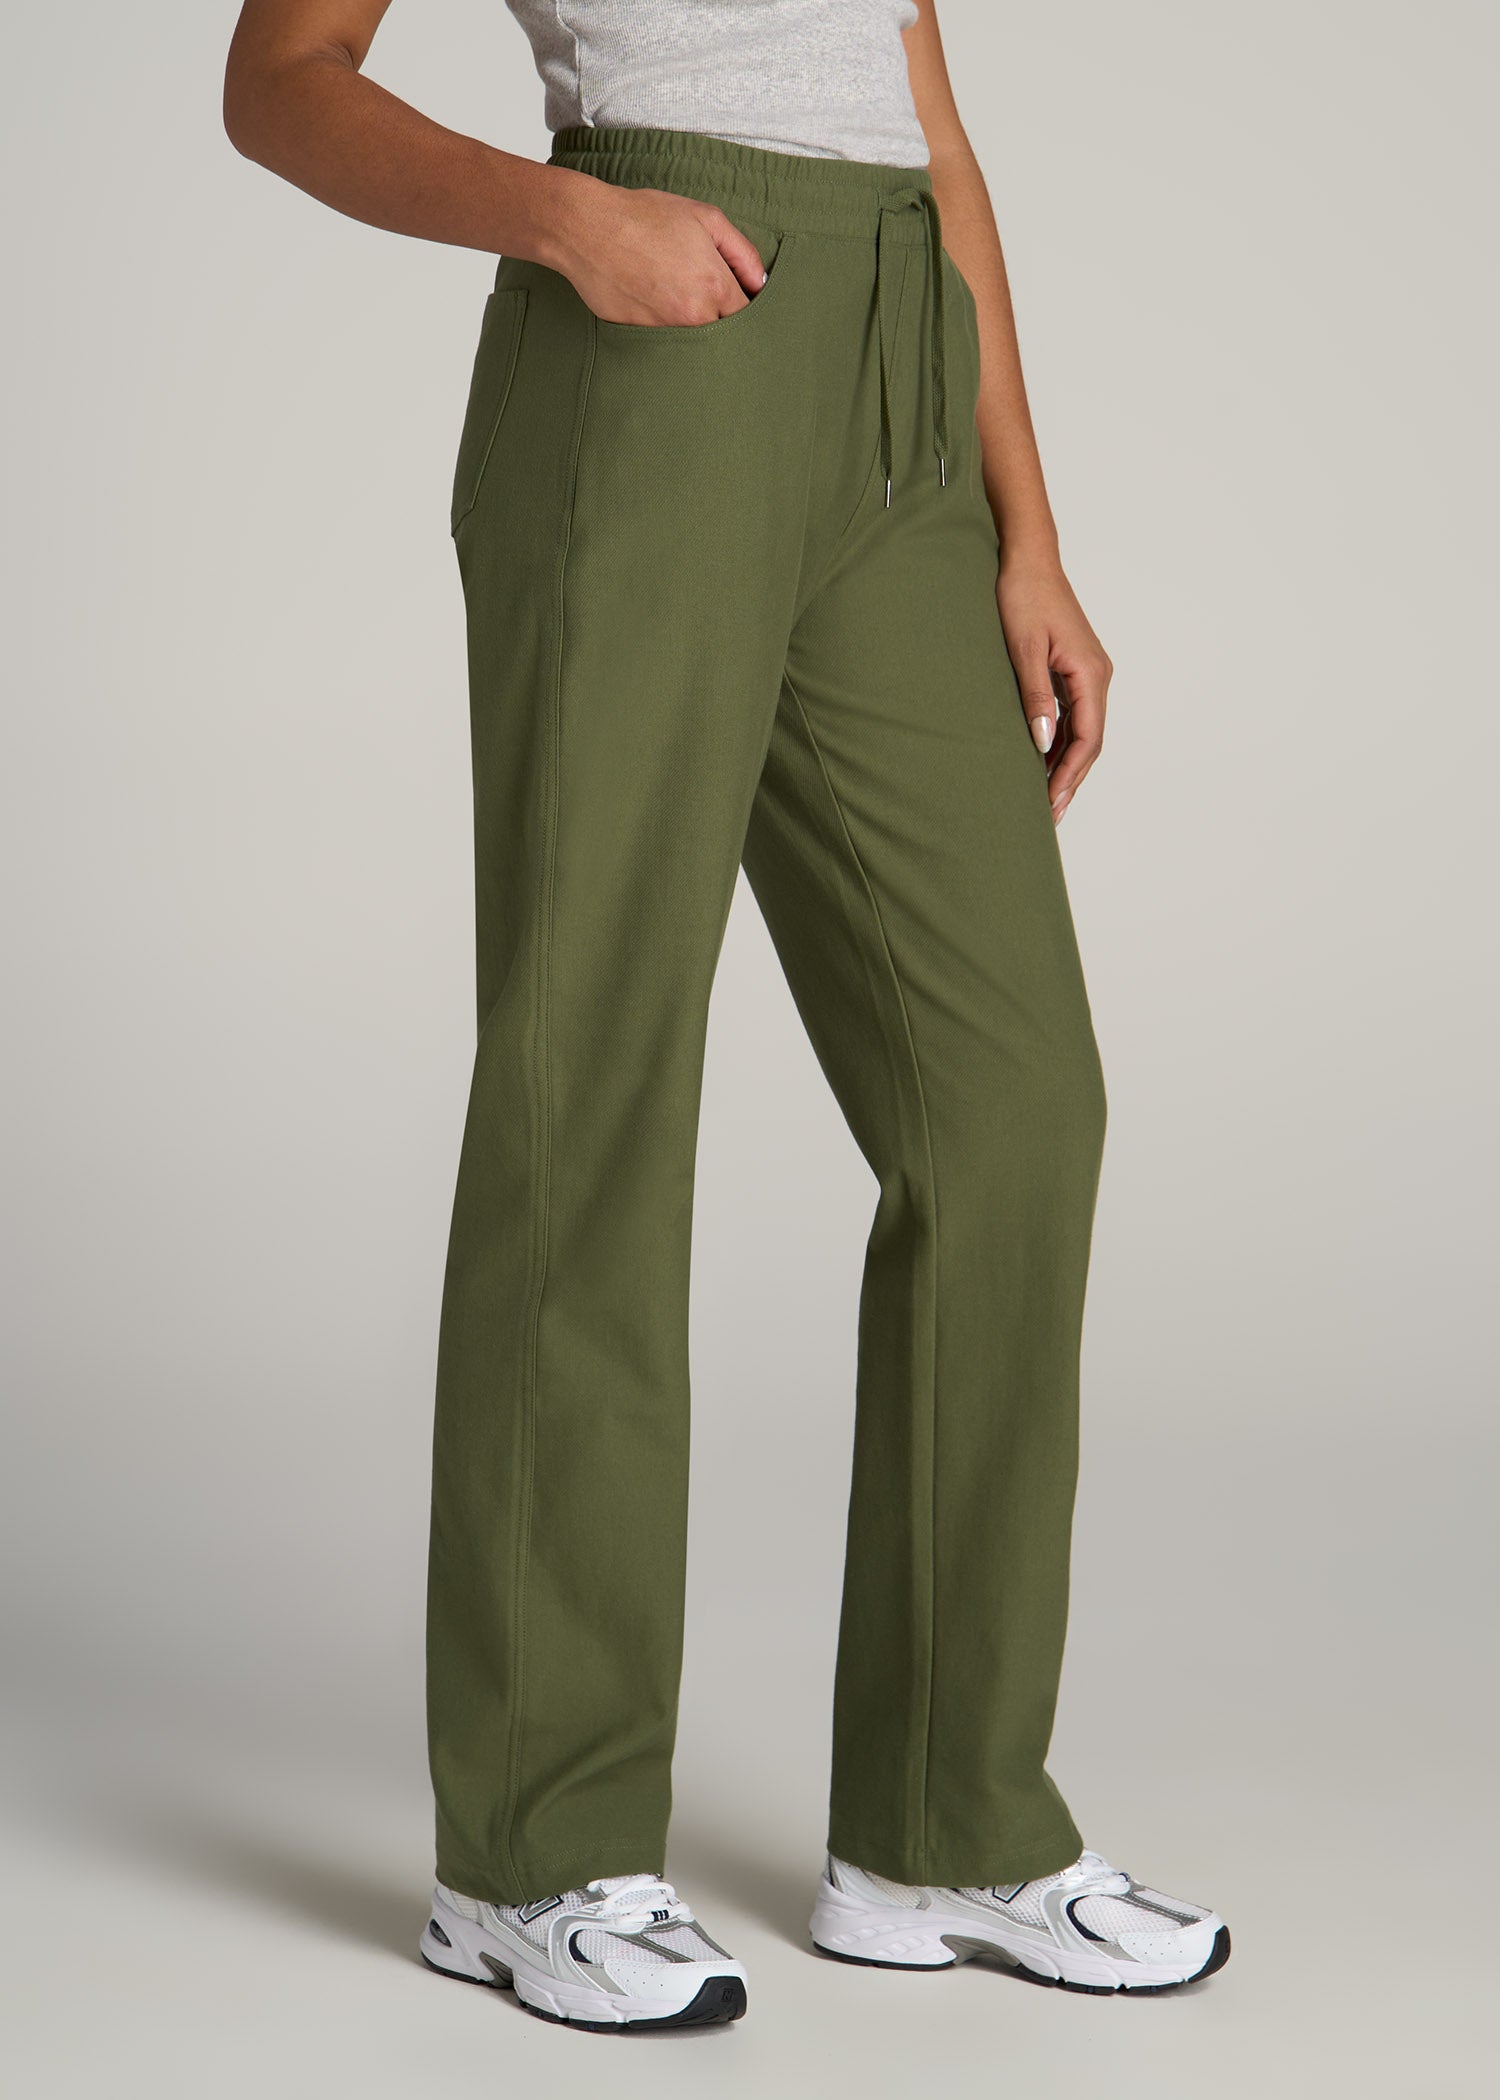 Pull-On Straight Leg Knit Pants for Tall Women – American Tall